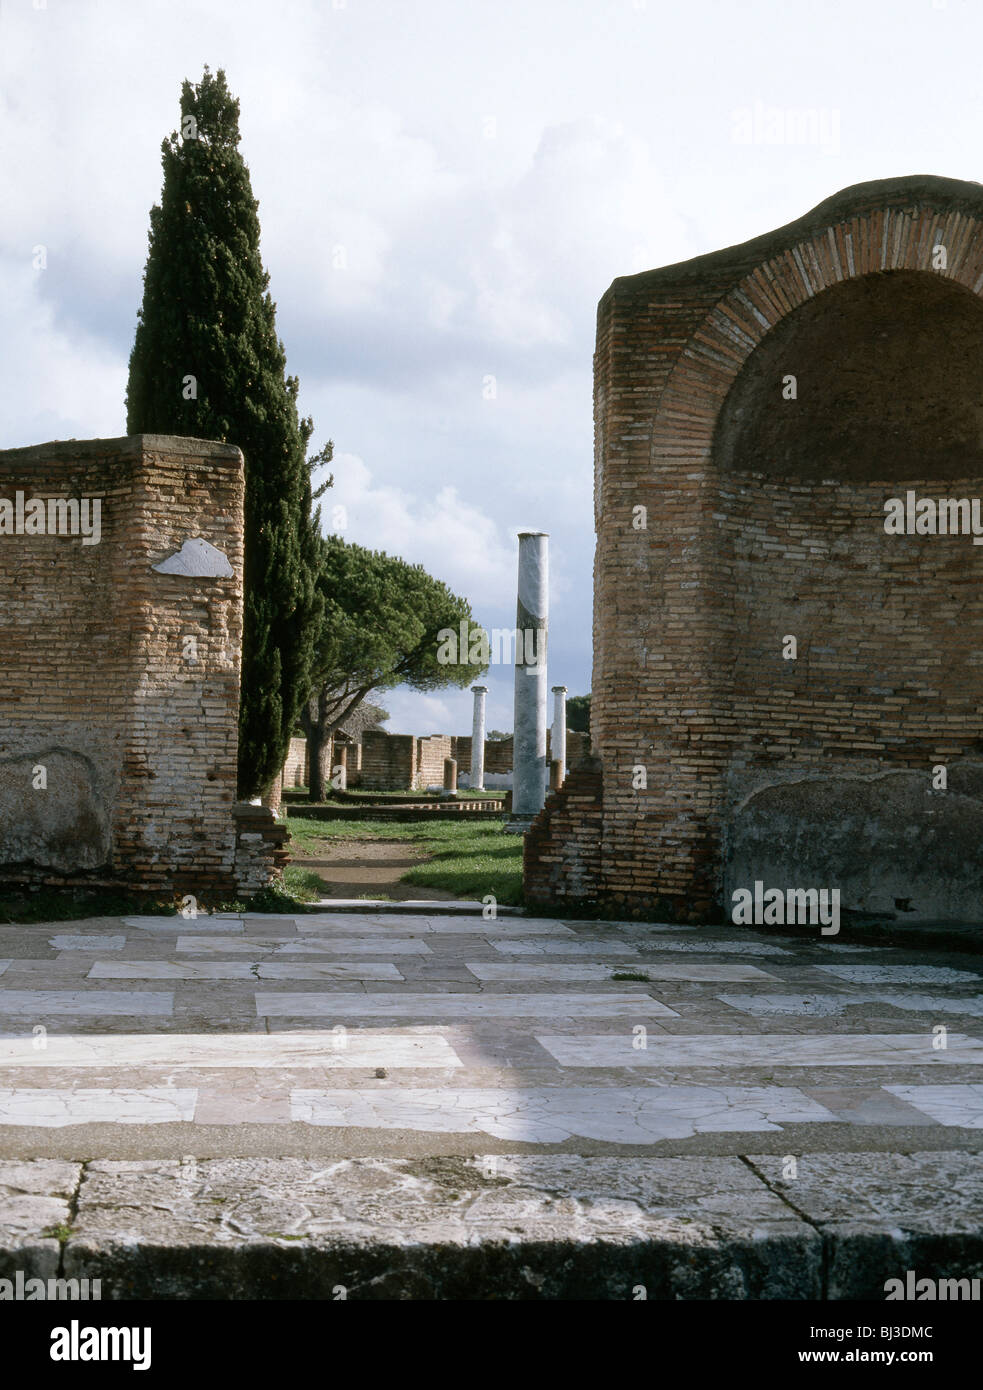 Street in the Roman city of Ostia, Italy. Artist: Werner Forman Stock Photo